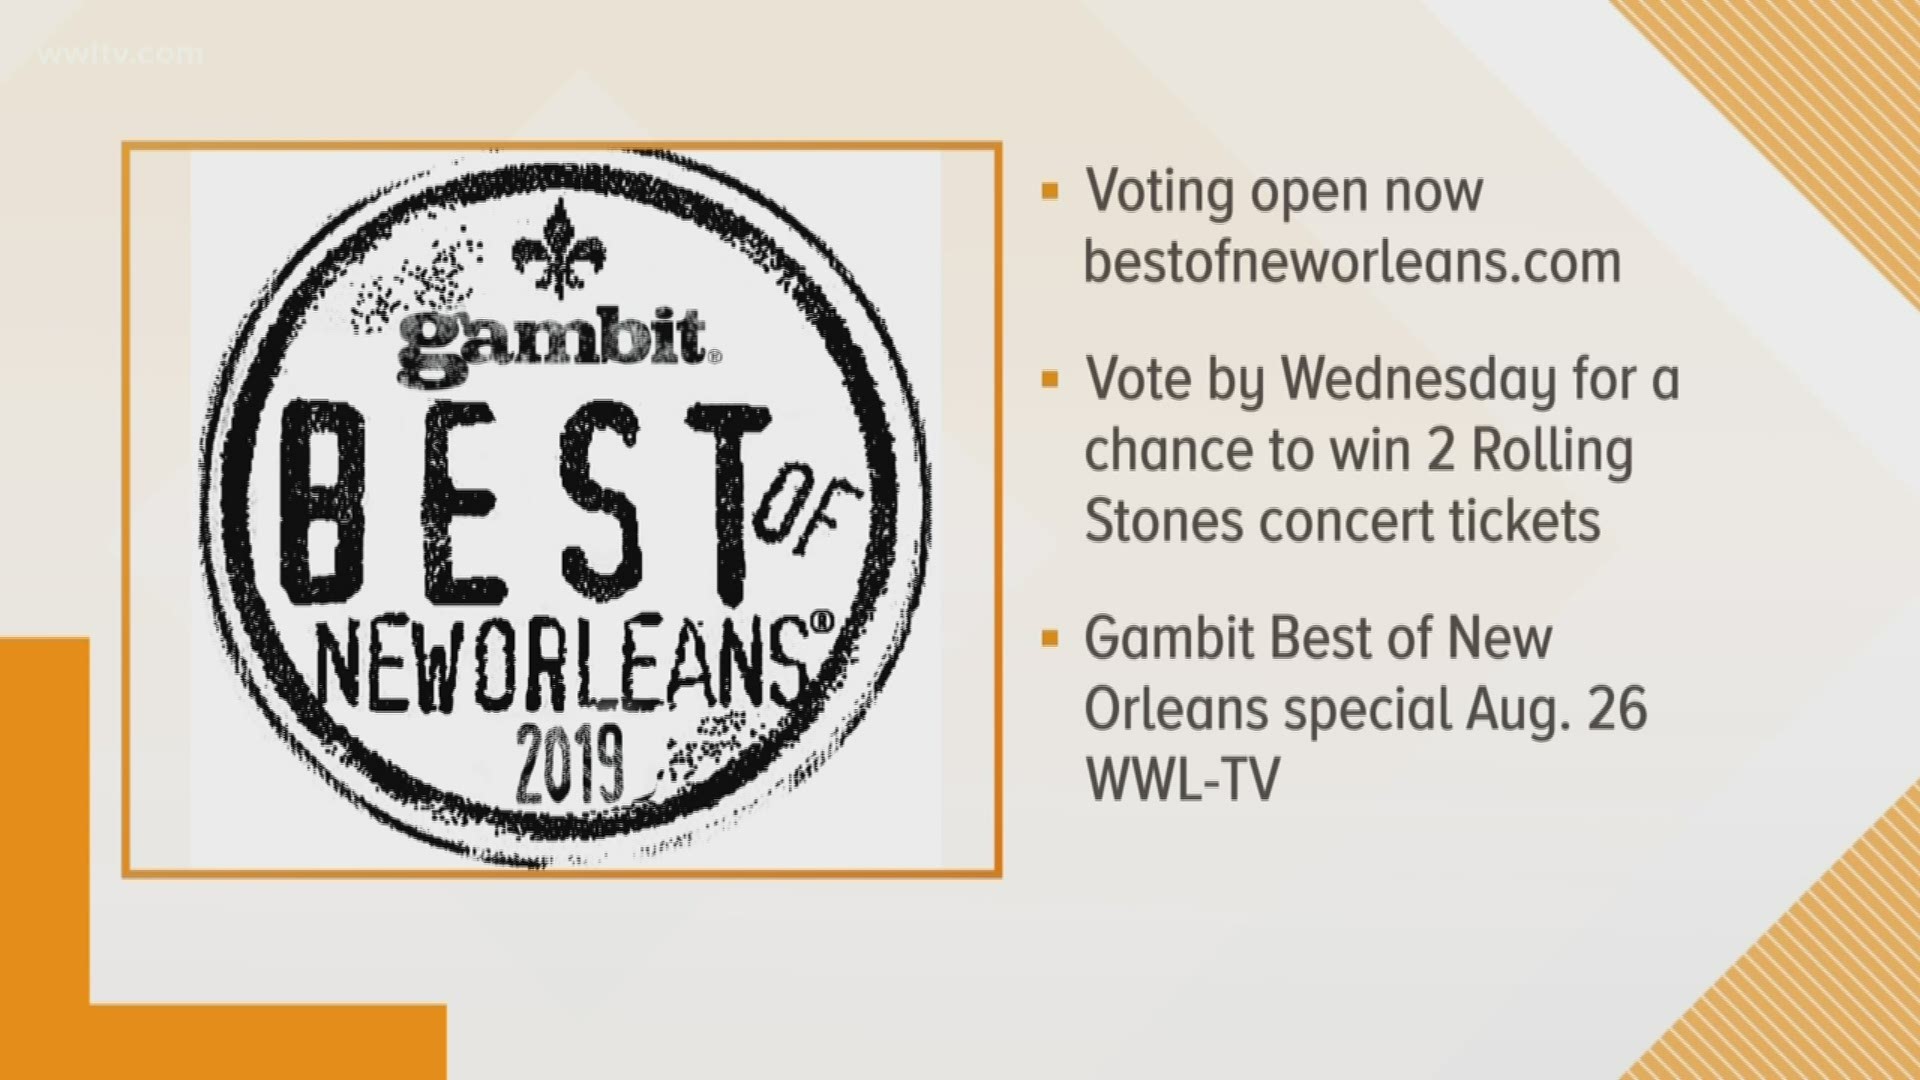 It's once again time for Gambit readers to weigh in on what they think is the best of New Orleans when it comes to restaurants, shopping, entertainment and more. You can cast your ballot now in the annual reader survey!